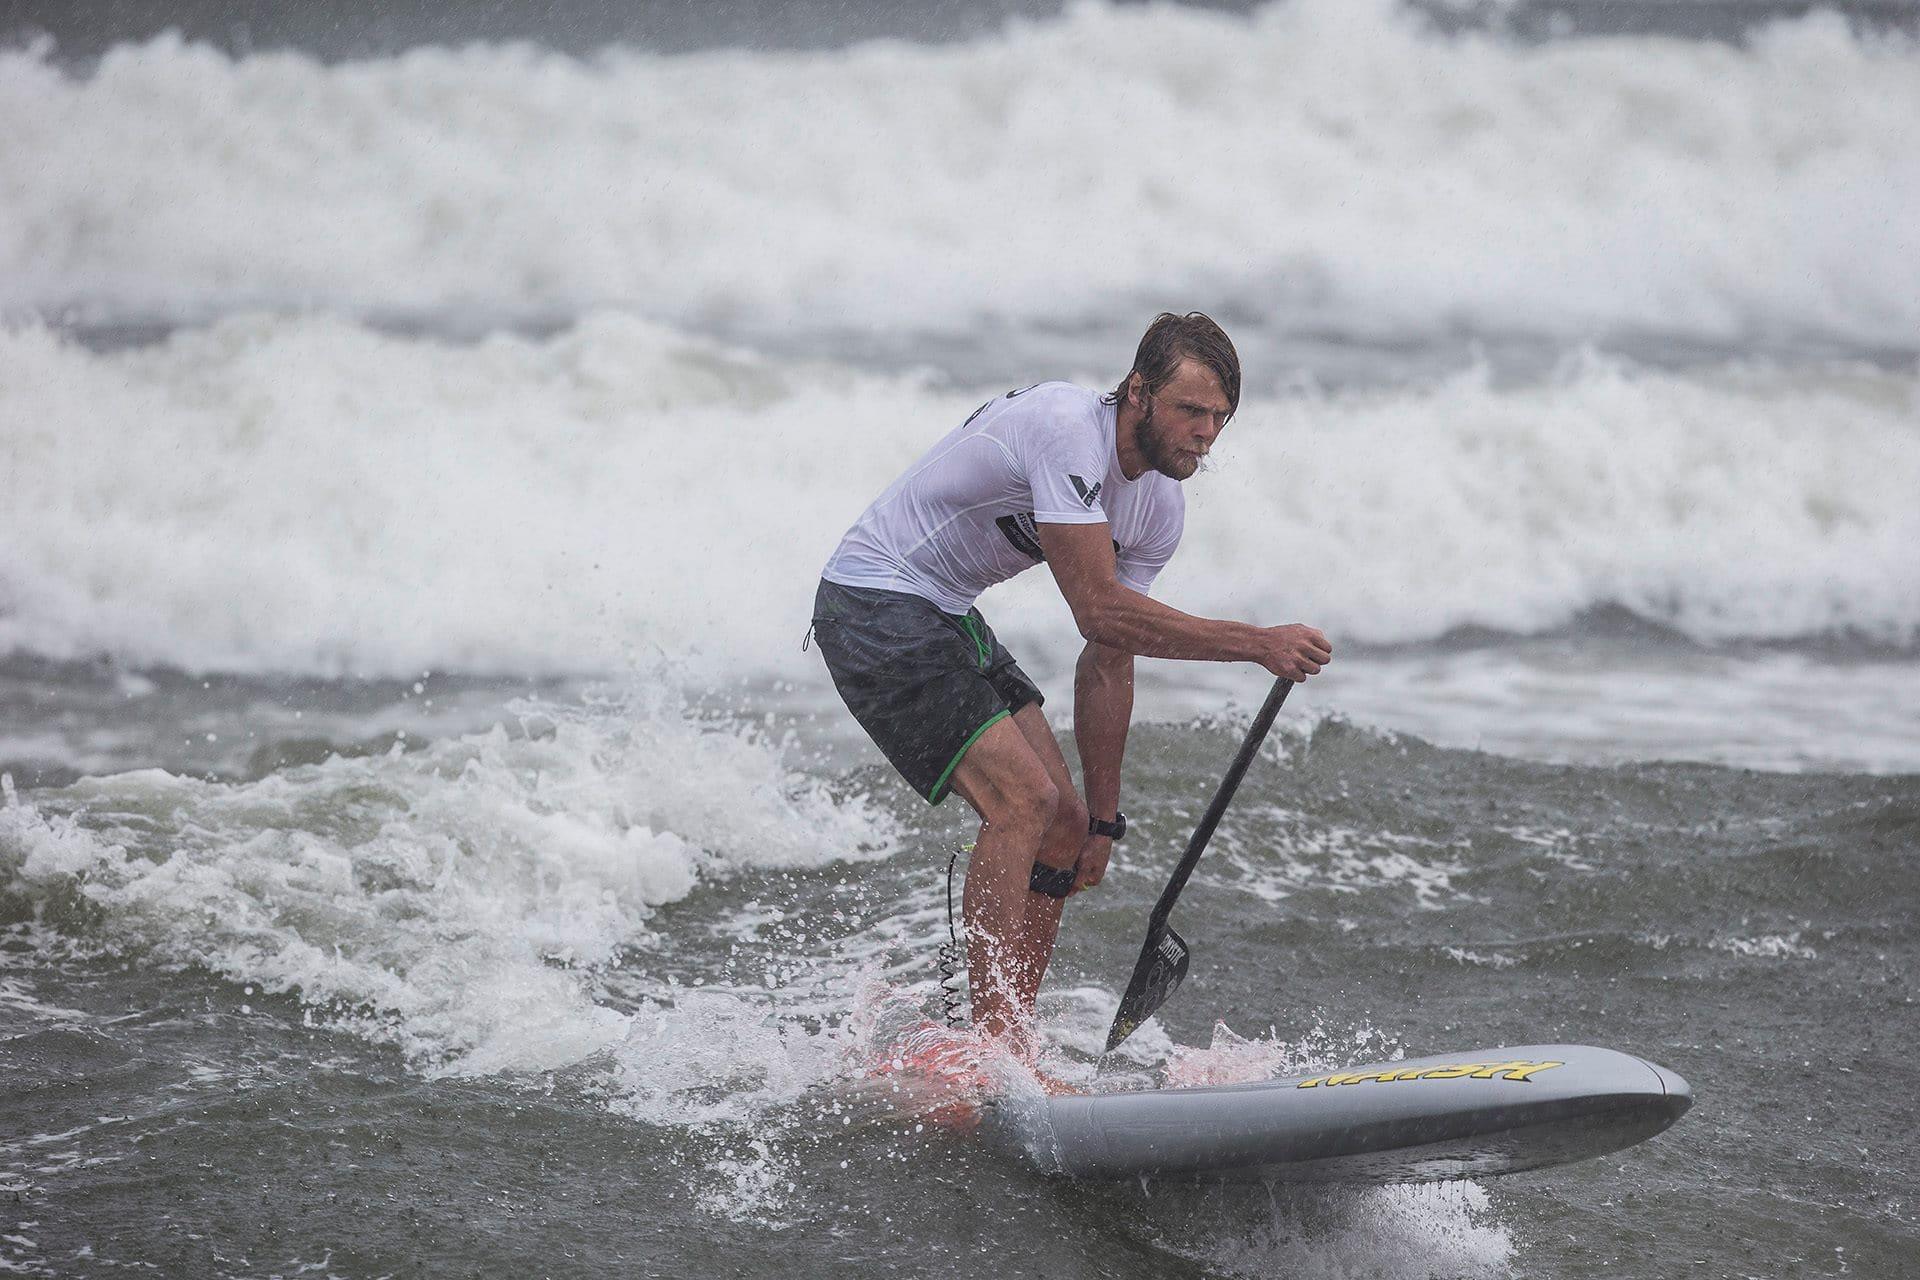 Casper Steinfath takes on Hurricane Florence for Third Place at APP New York SUP Open - Naish.com